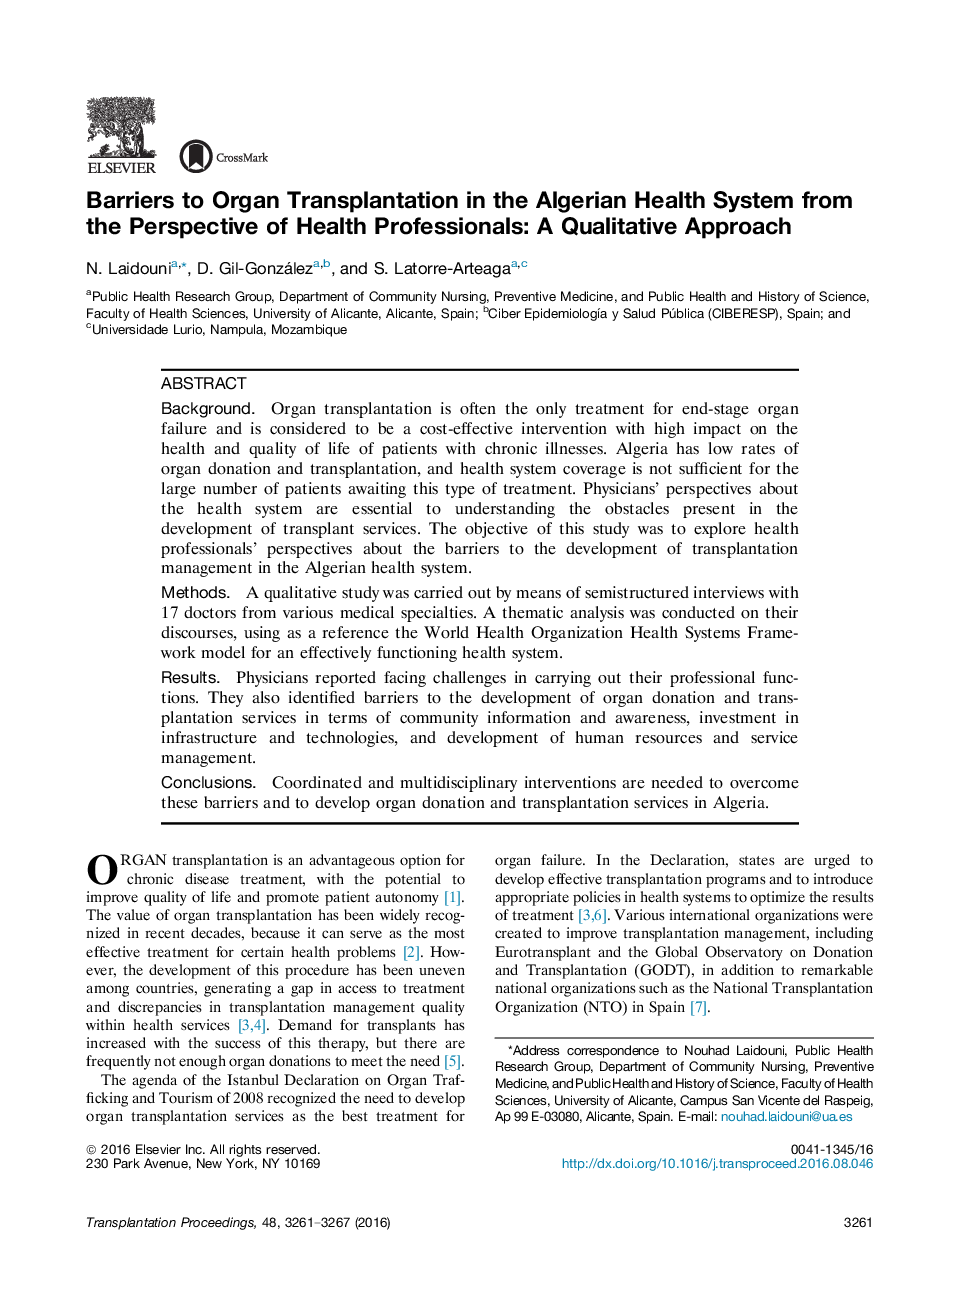 Recent Advances in TransplantationRenal transplantationBarriers to Organ Transplantation in the Algerian Health System from the Perspective of Health Professionals: A Qualitative Approach